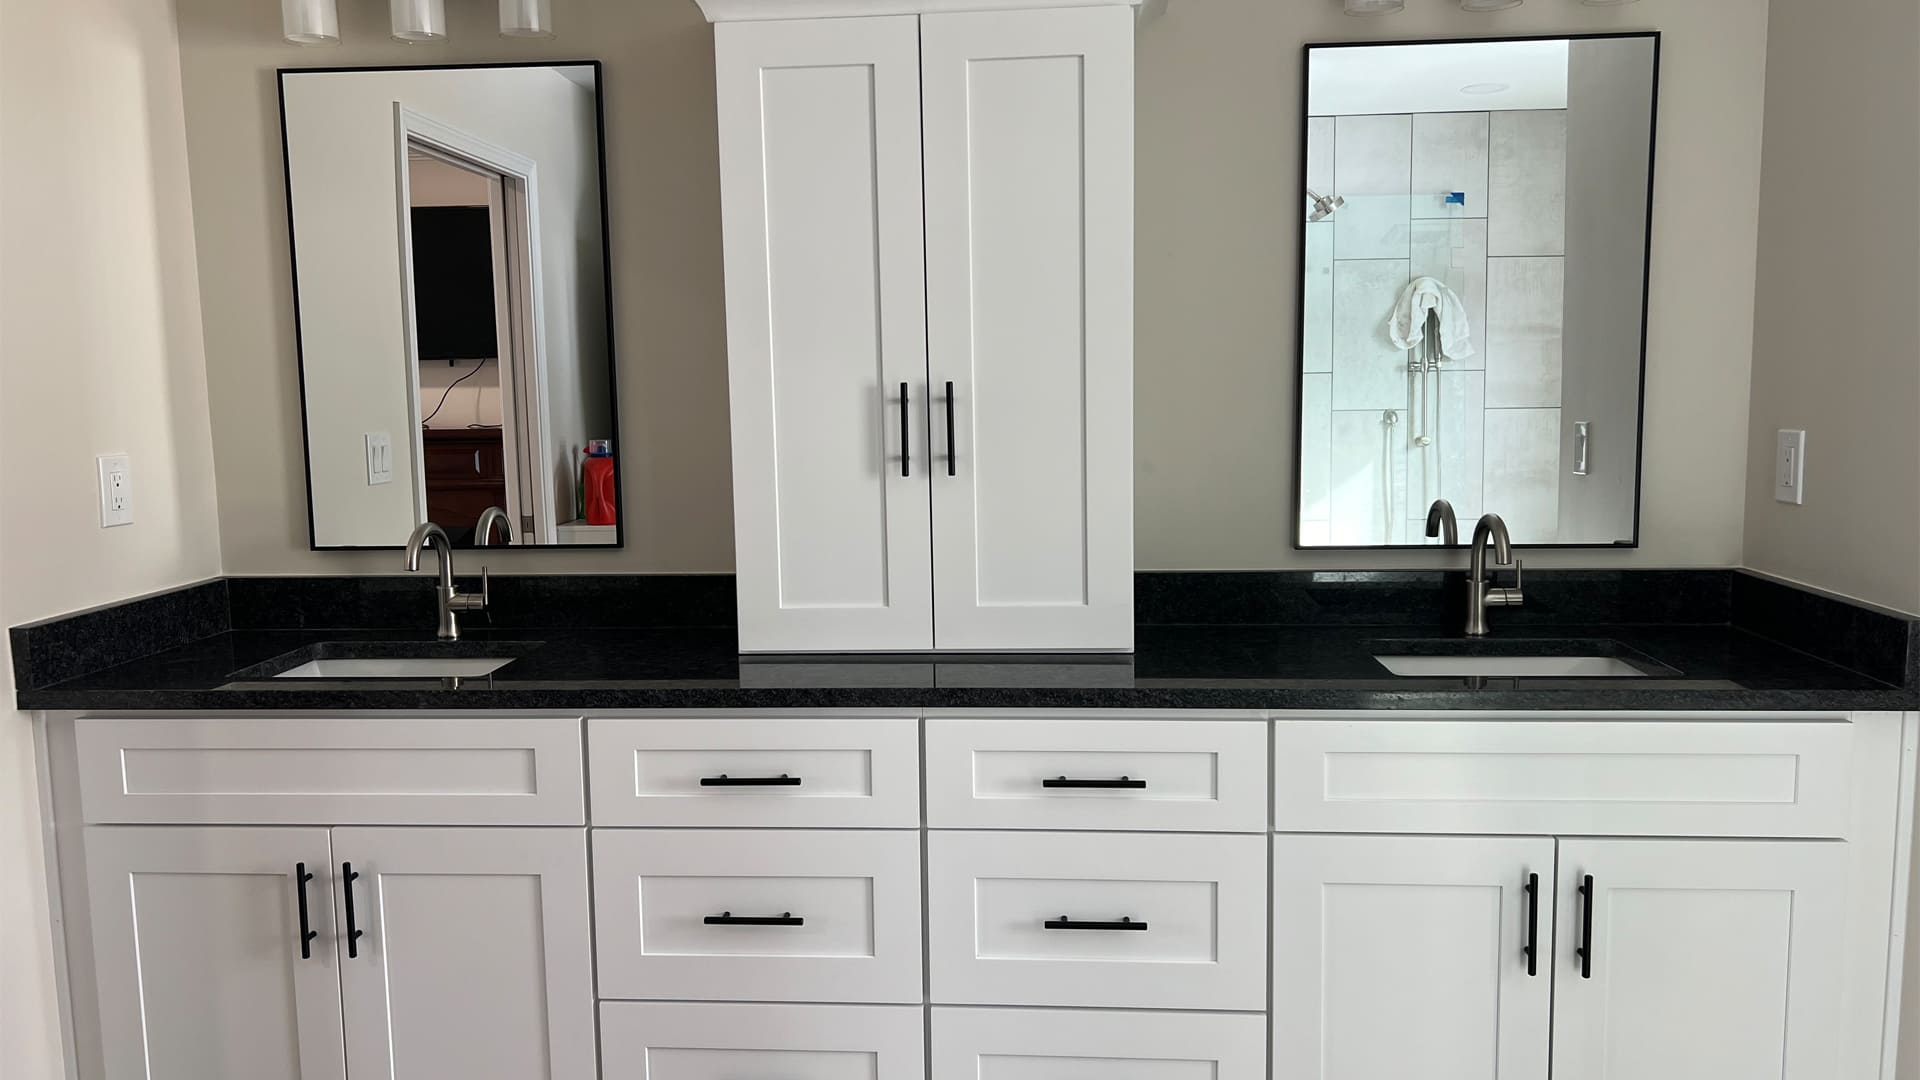 Contemporary black and white bathroom double sink vanity with white shaker lower cabinets and a black stone countertop